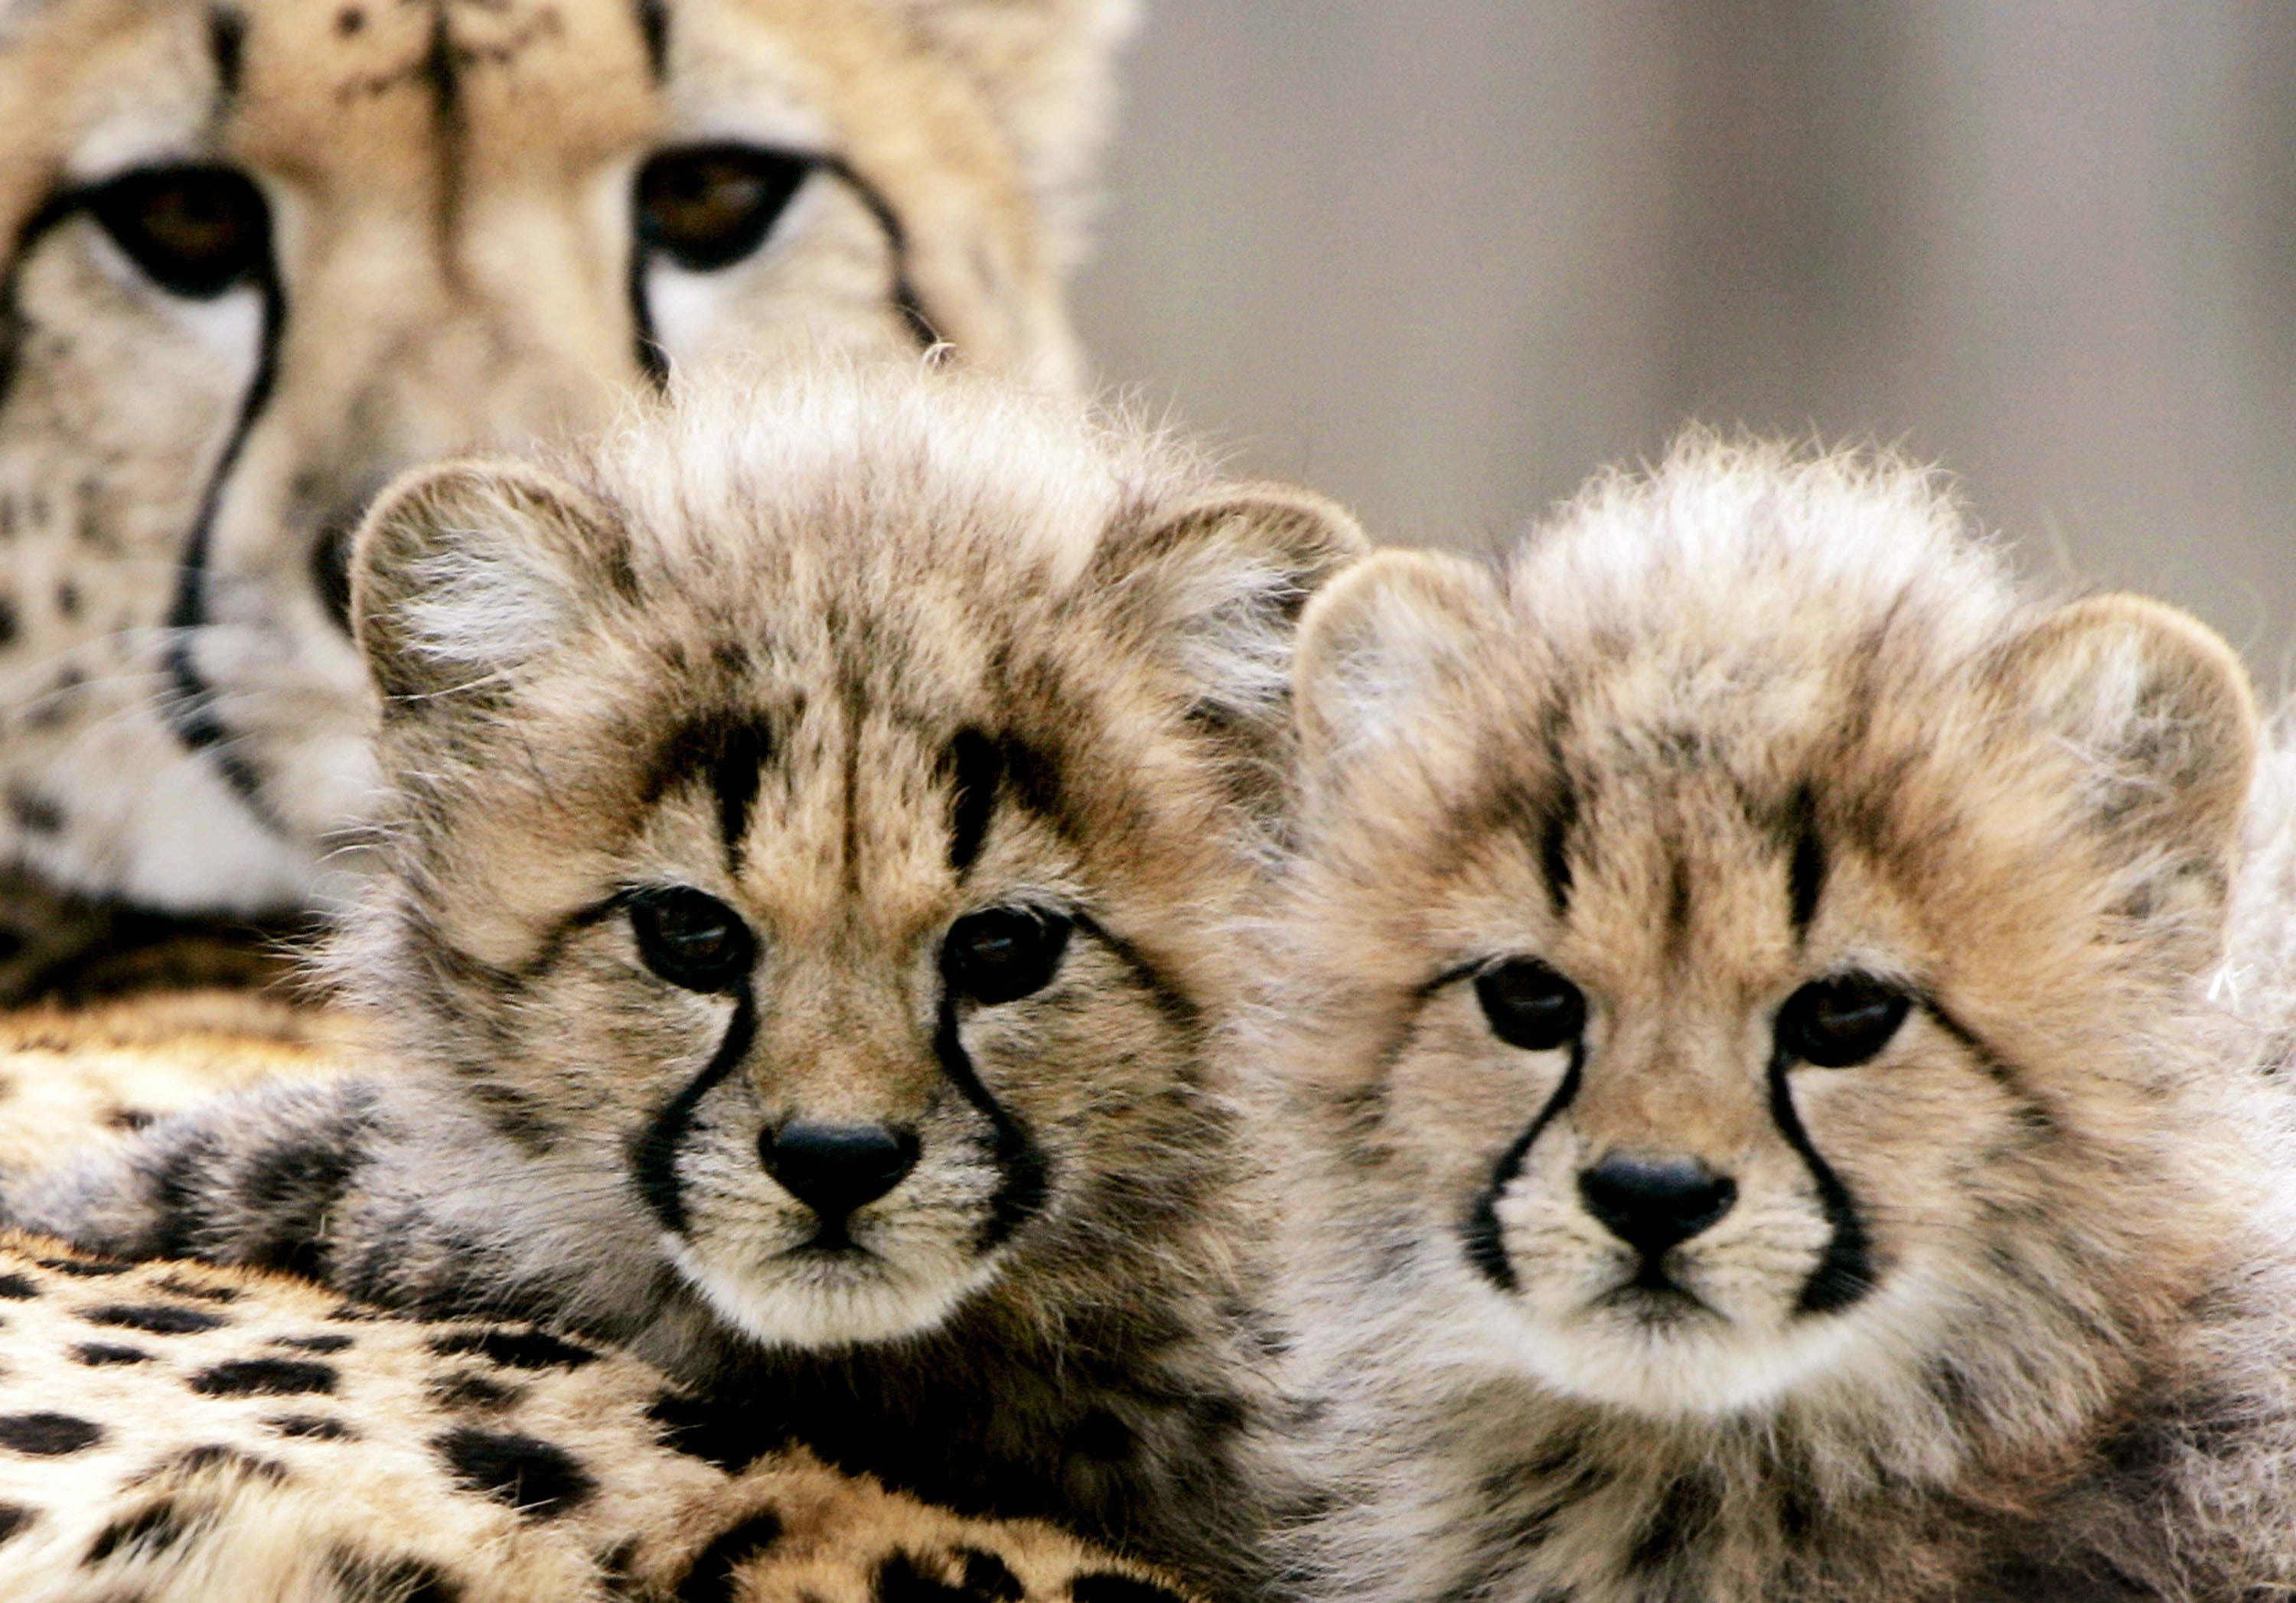 Two cheetah cubs born at the zoo in 2005. (Photo: Win McNamee, Getty Images)